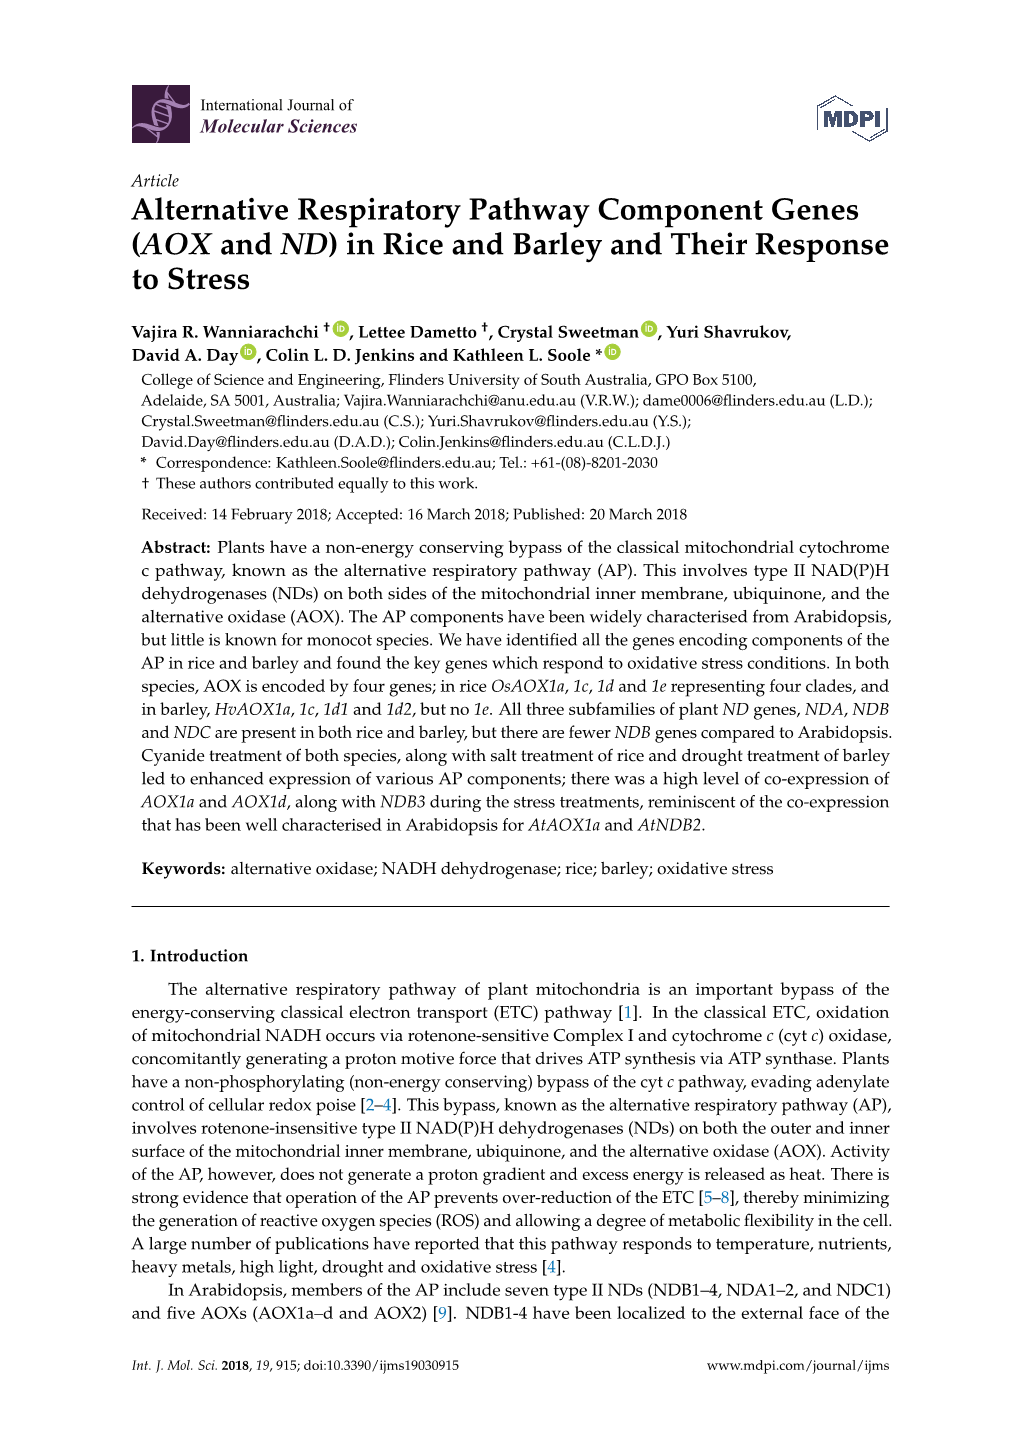 Alternative Respiratory Pathway Component Genes (AOX and ND) in Rice and Barley and Their Response to Stress